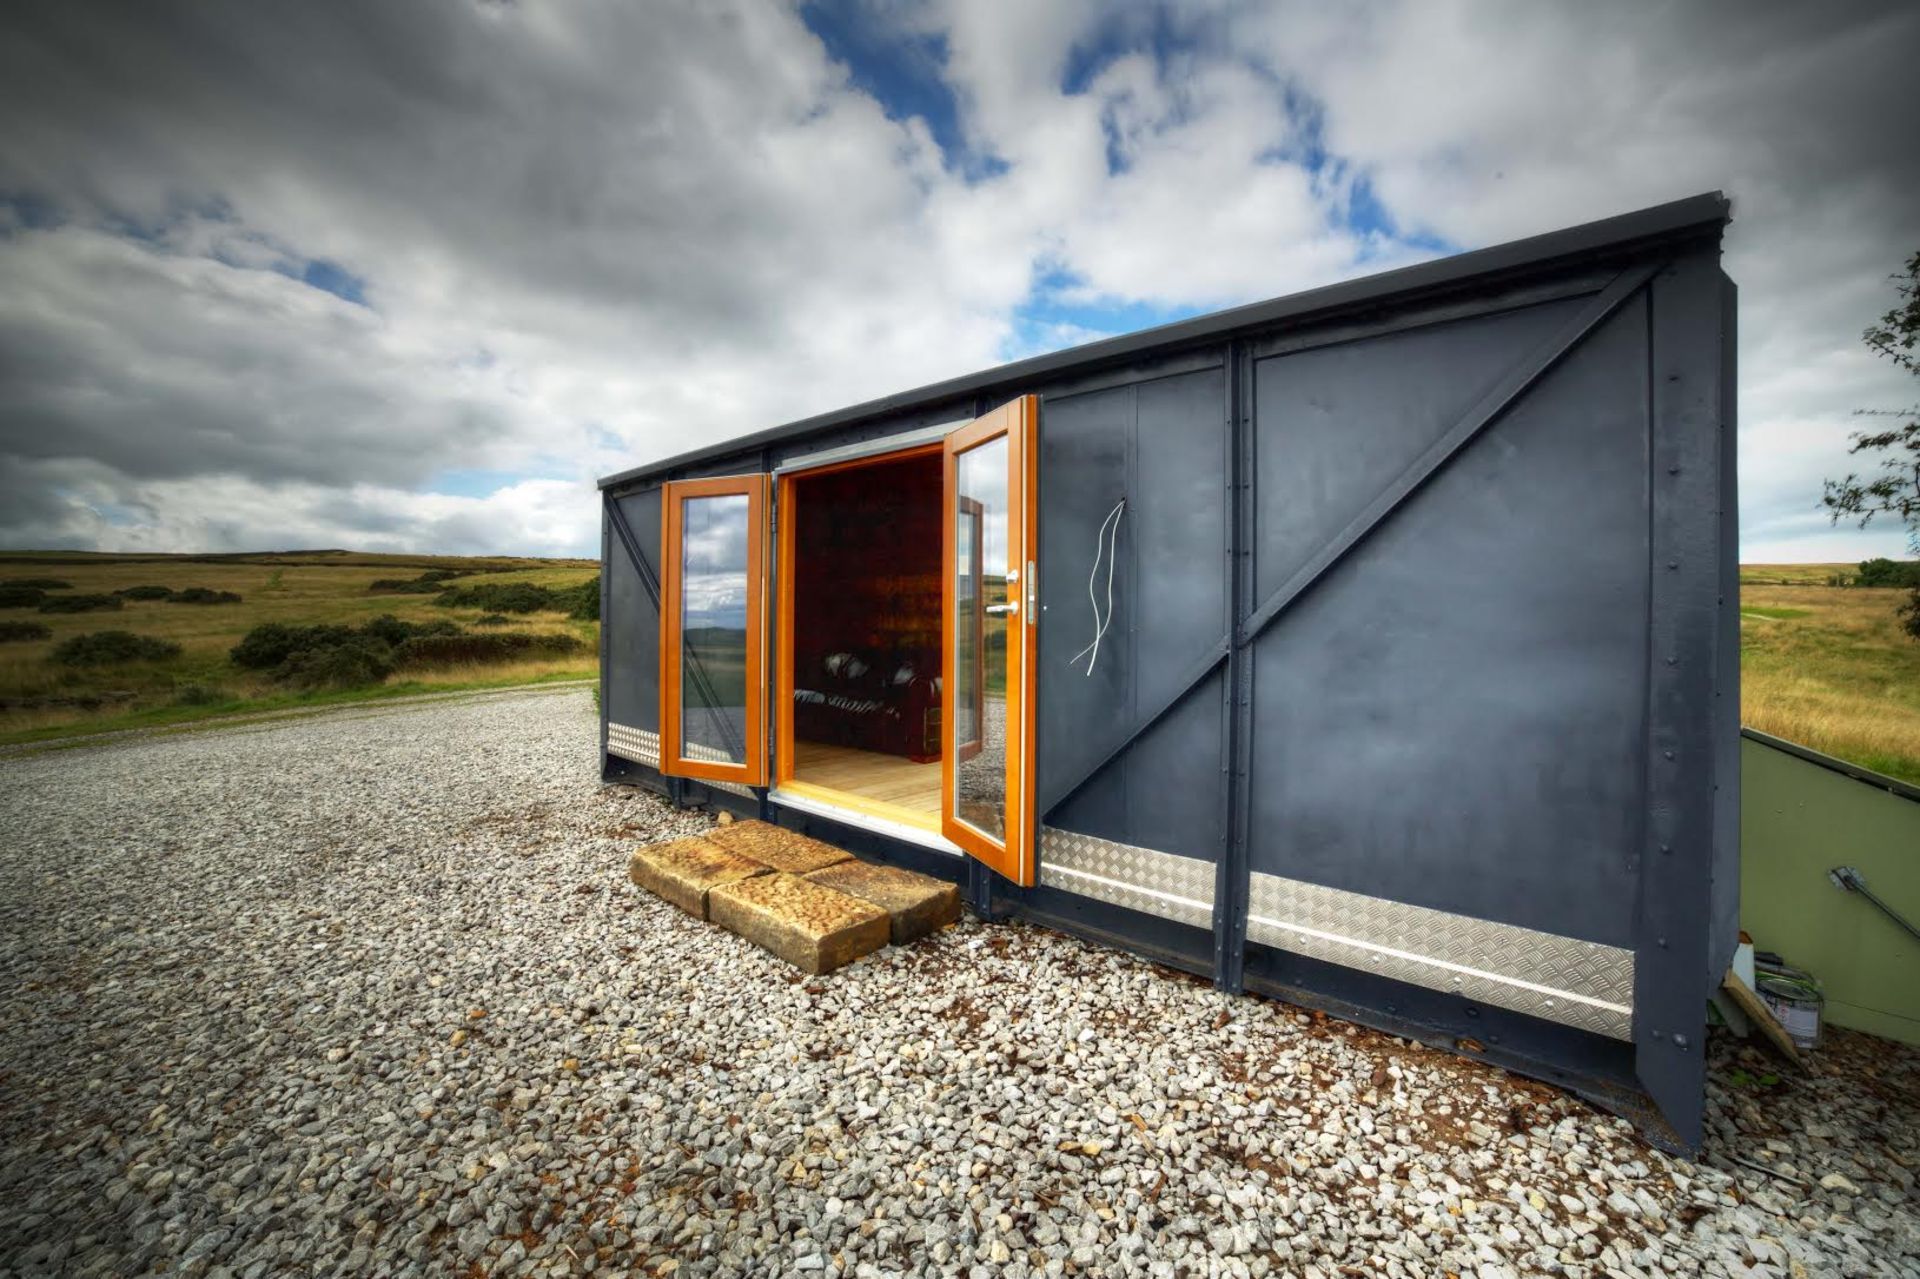 Refurbished Railway carriage, ideal for accommodation, shoot cabin, office, garden room. - Image 3 of 5